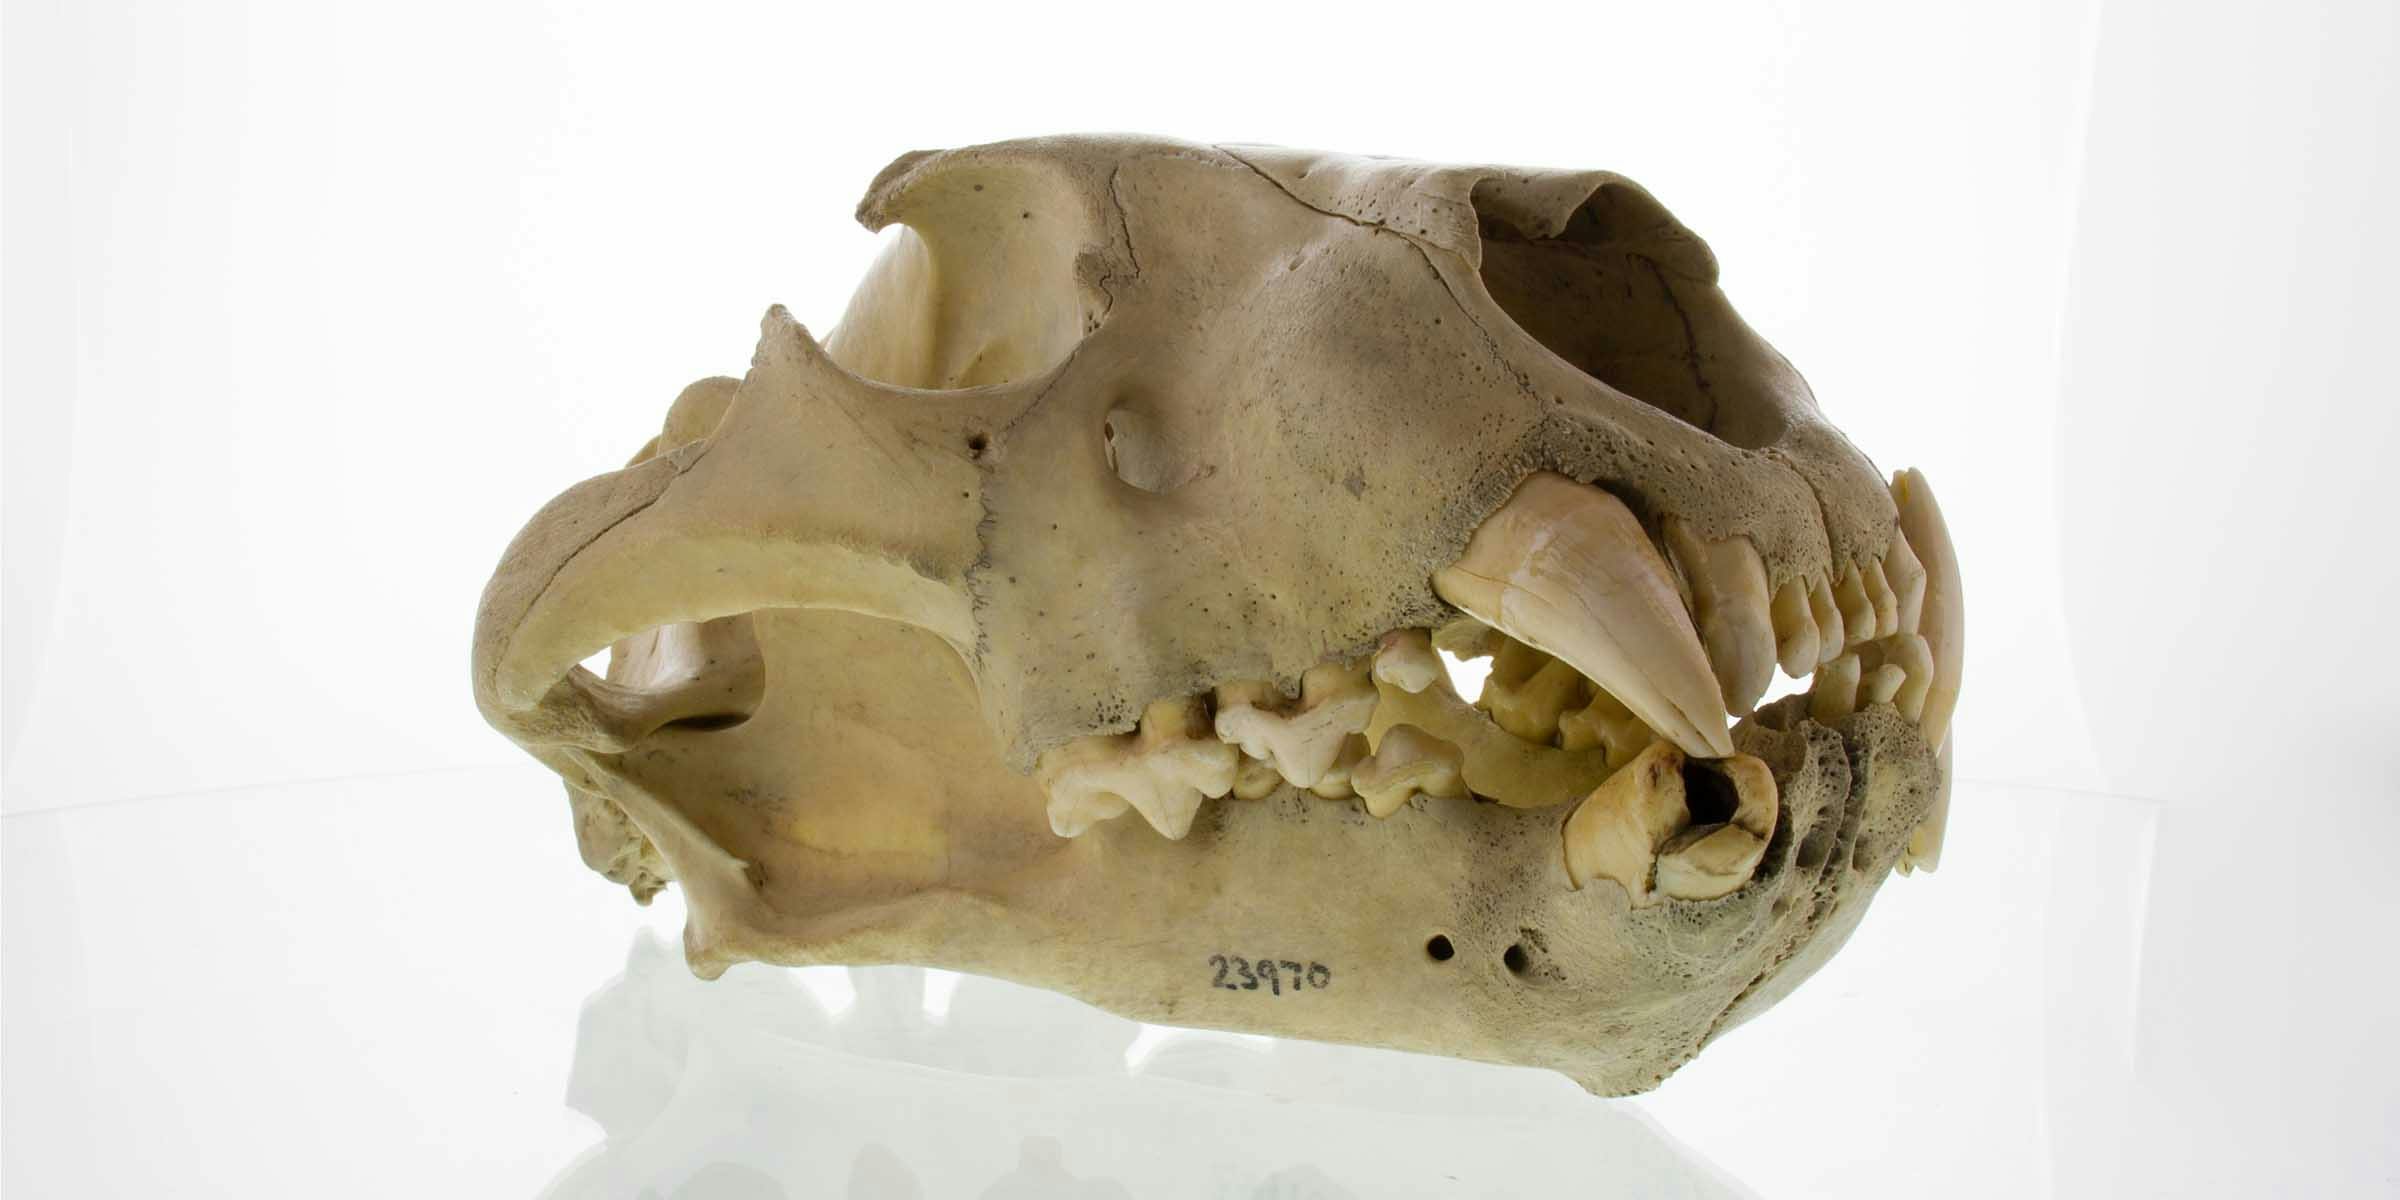 A yellowed animal skull with large canine teeth, on a white surface and backdrop